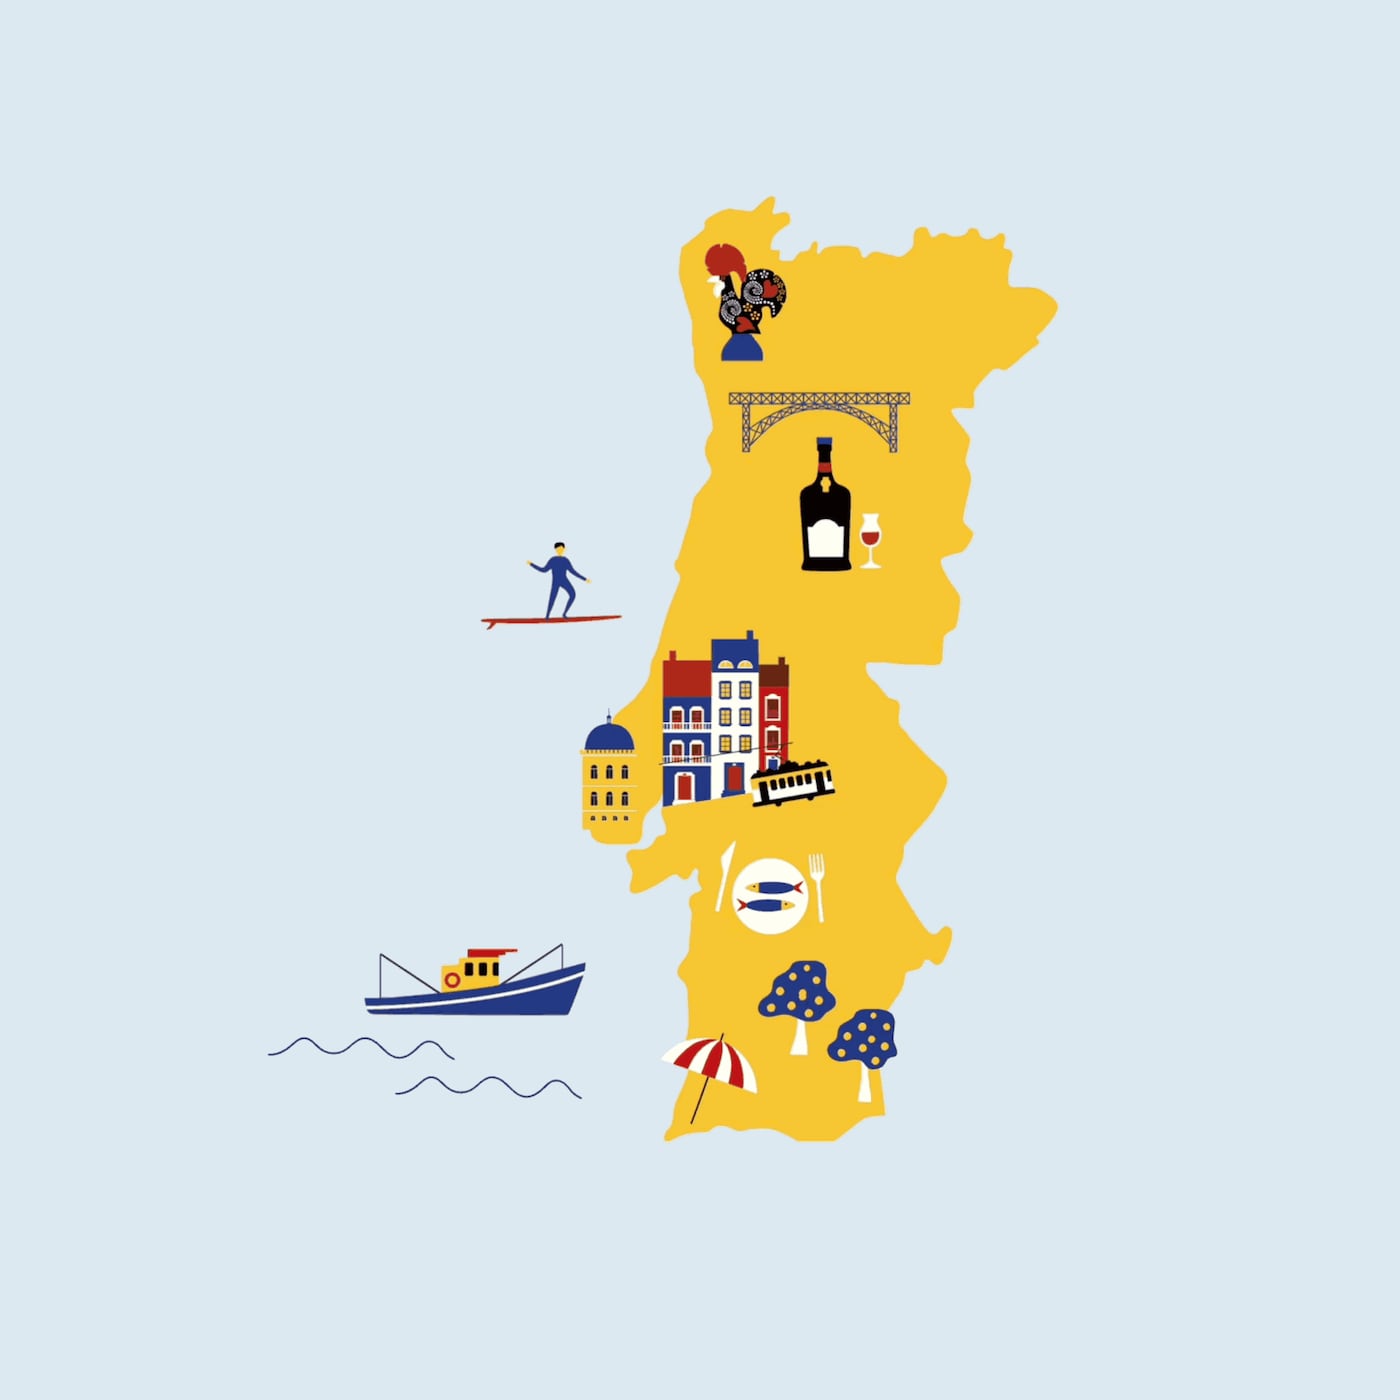 A graphic map of Portugal in yellow and blue.